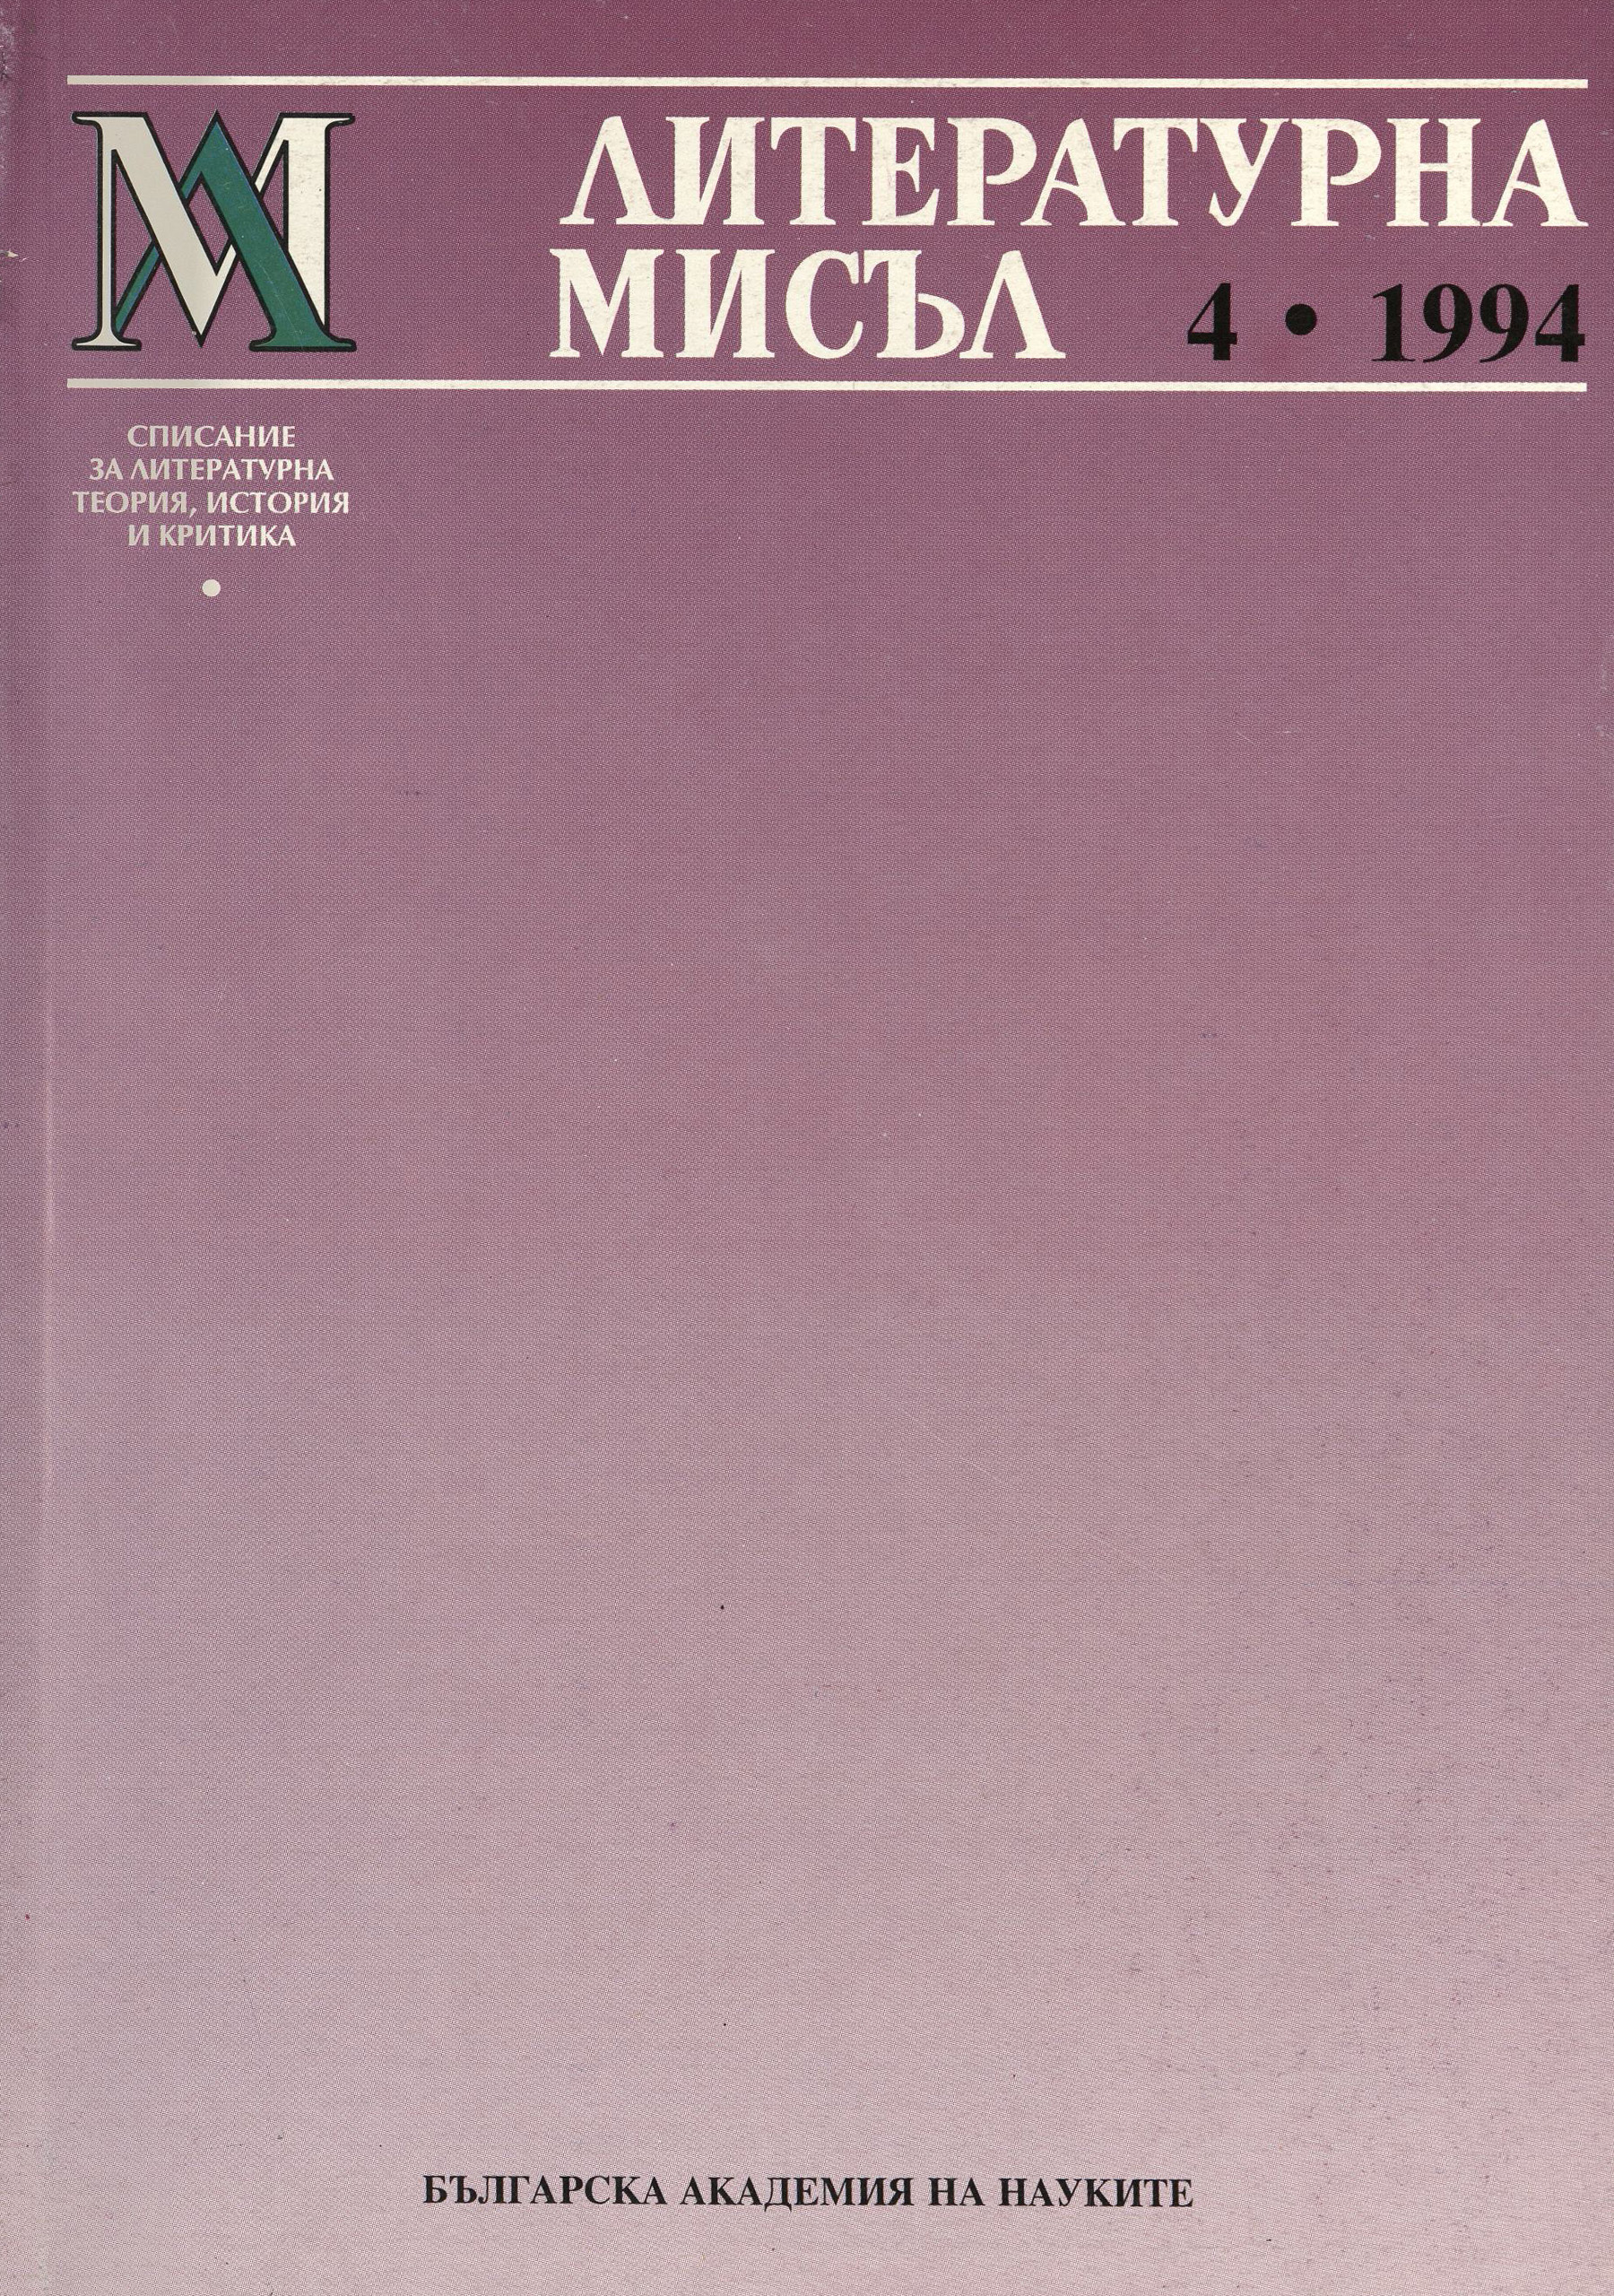 Issue 4, 1994